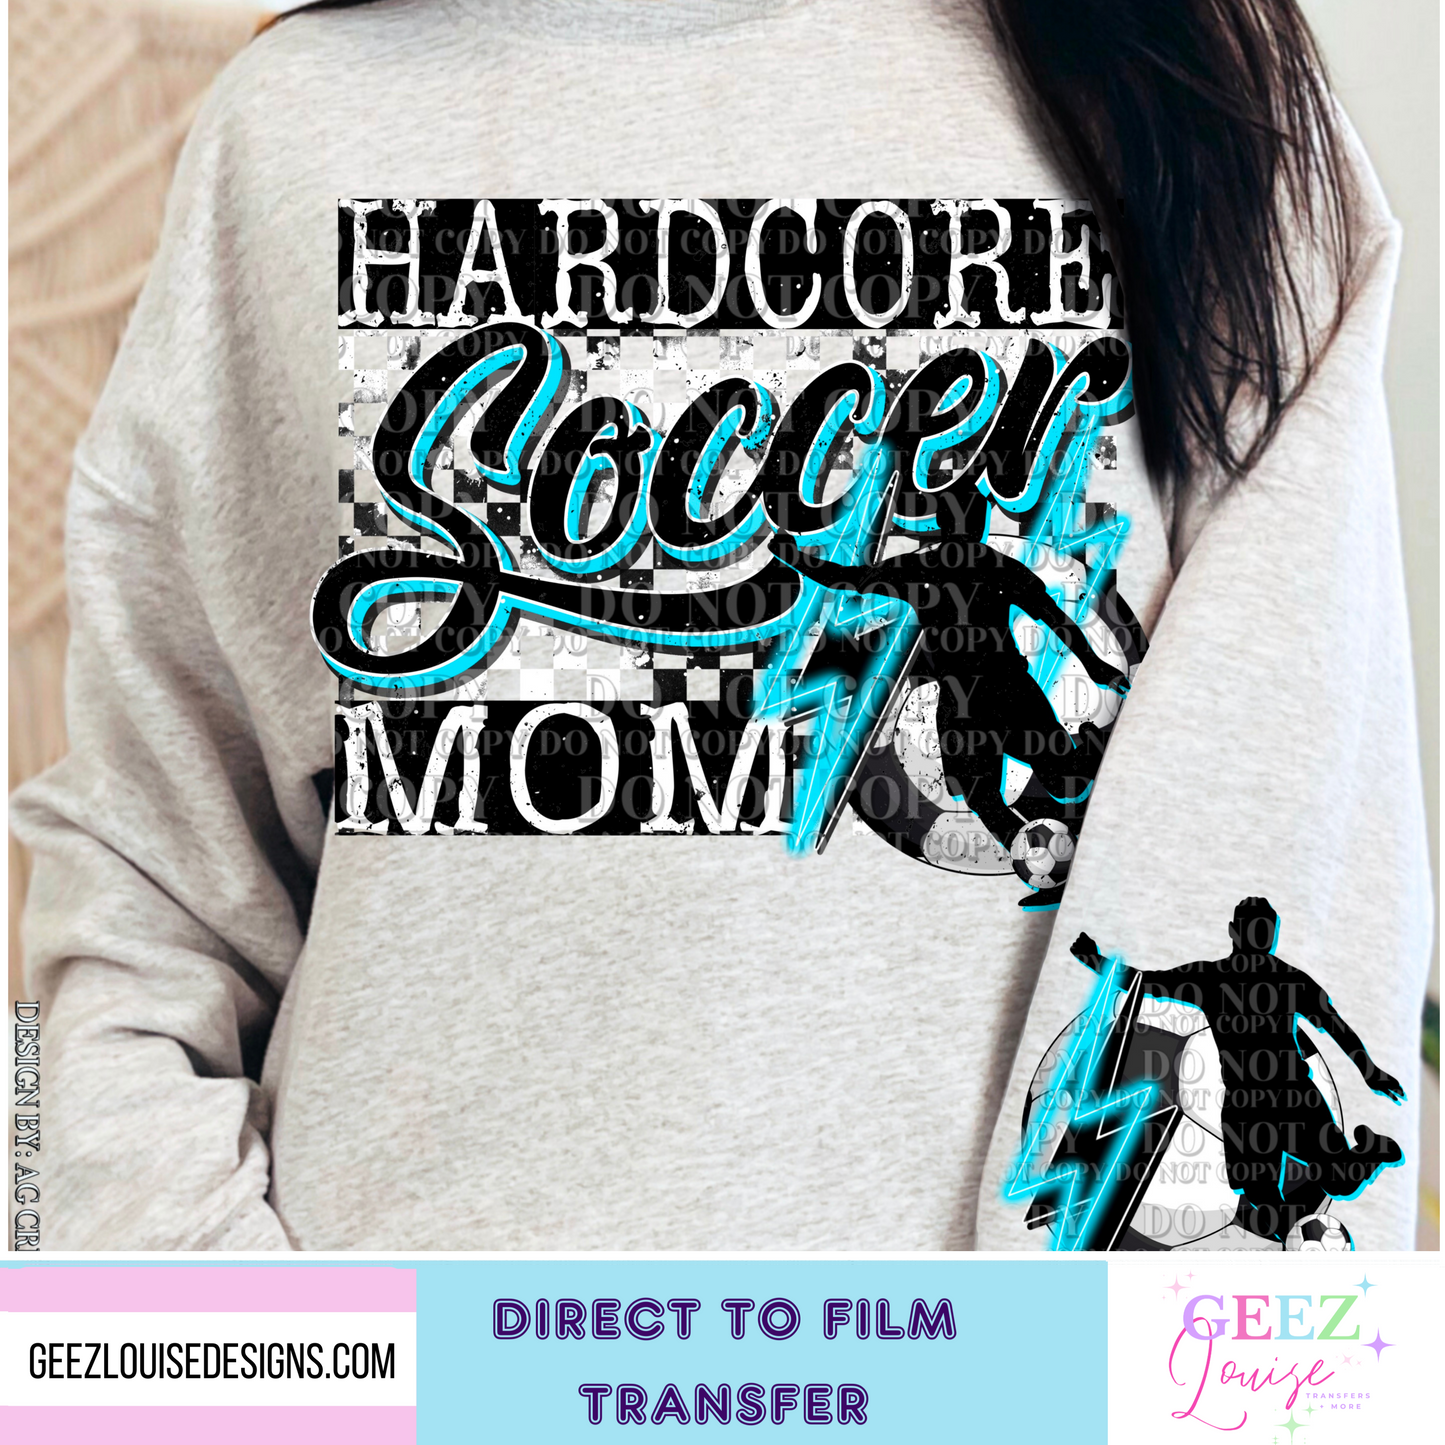 Hardcore Soccer mom - Direct to Film Transfer - made to order